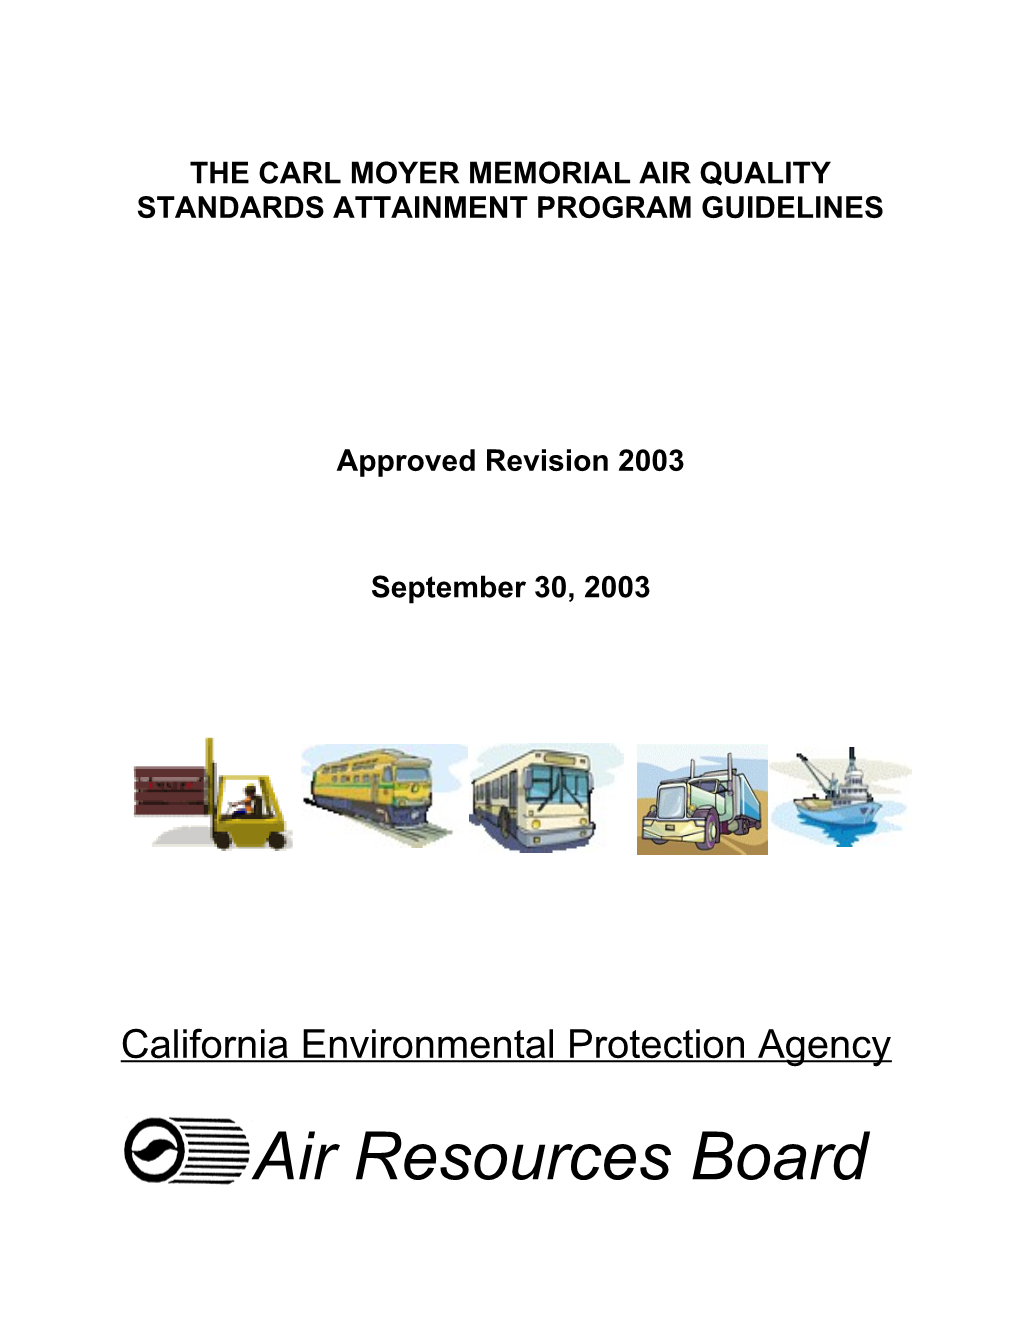 The Carl Moyer Memorial Air Quality Standards Attainment Program Guidelines